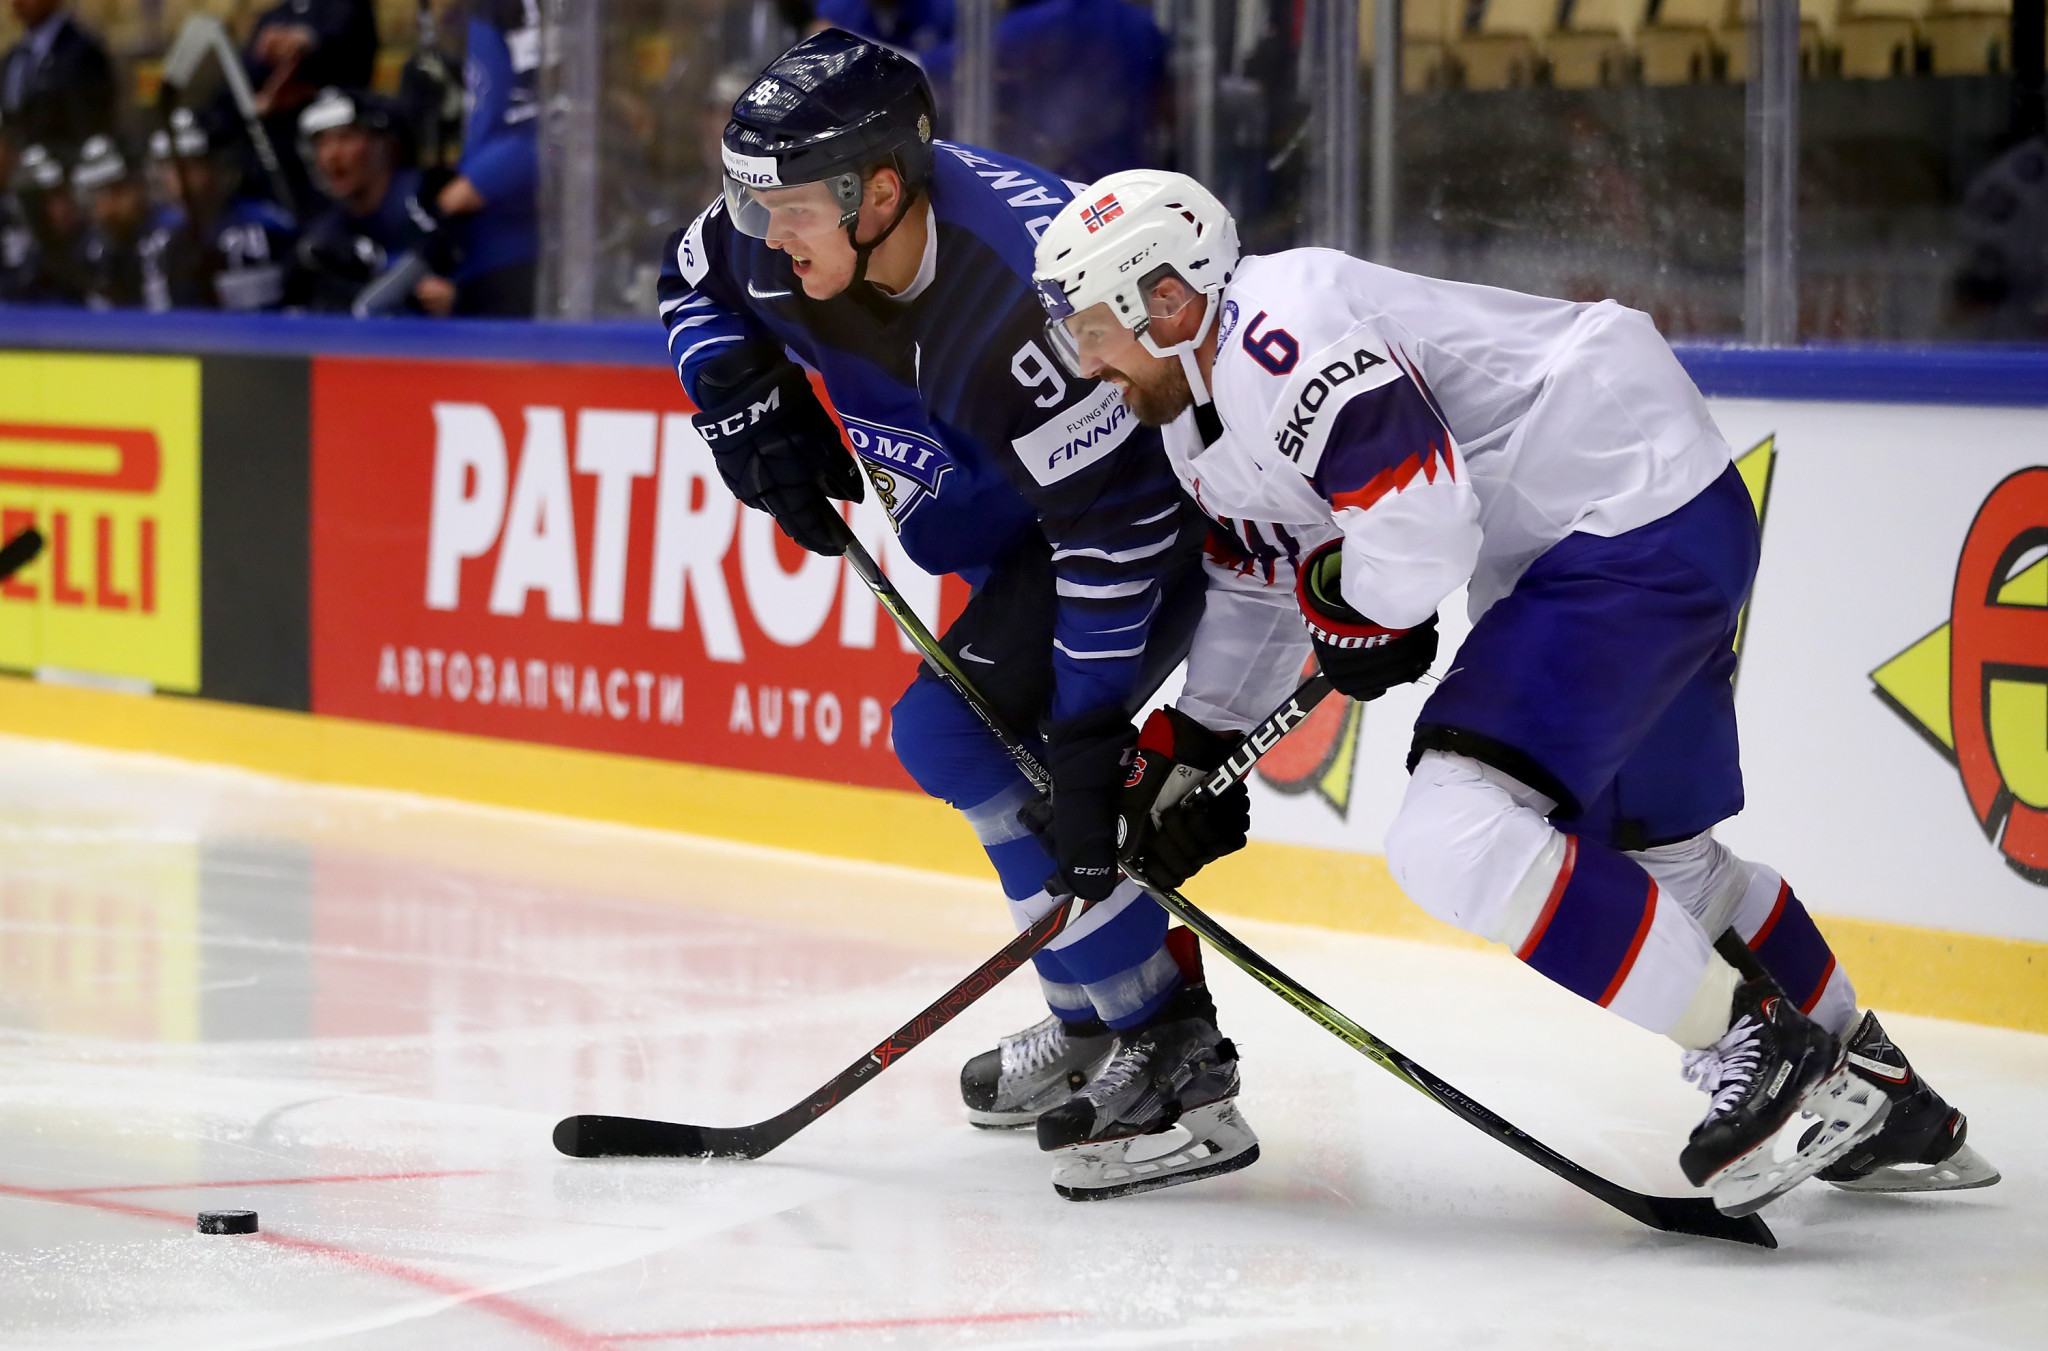 Finland go top of Group B with comfortable win over Norway at IIHF World Championship